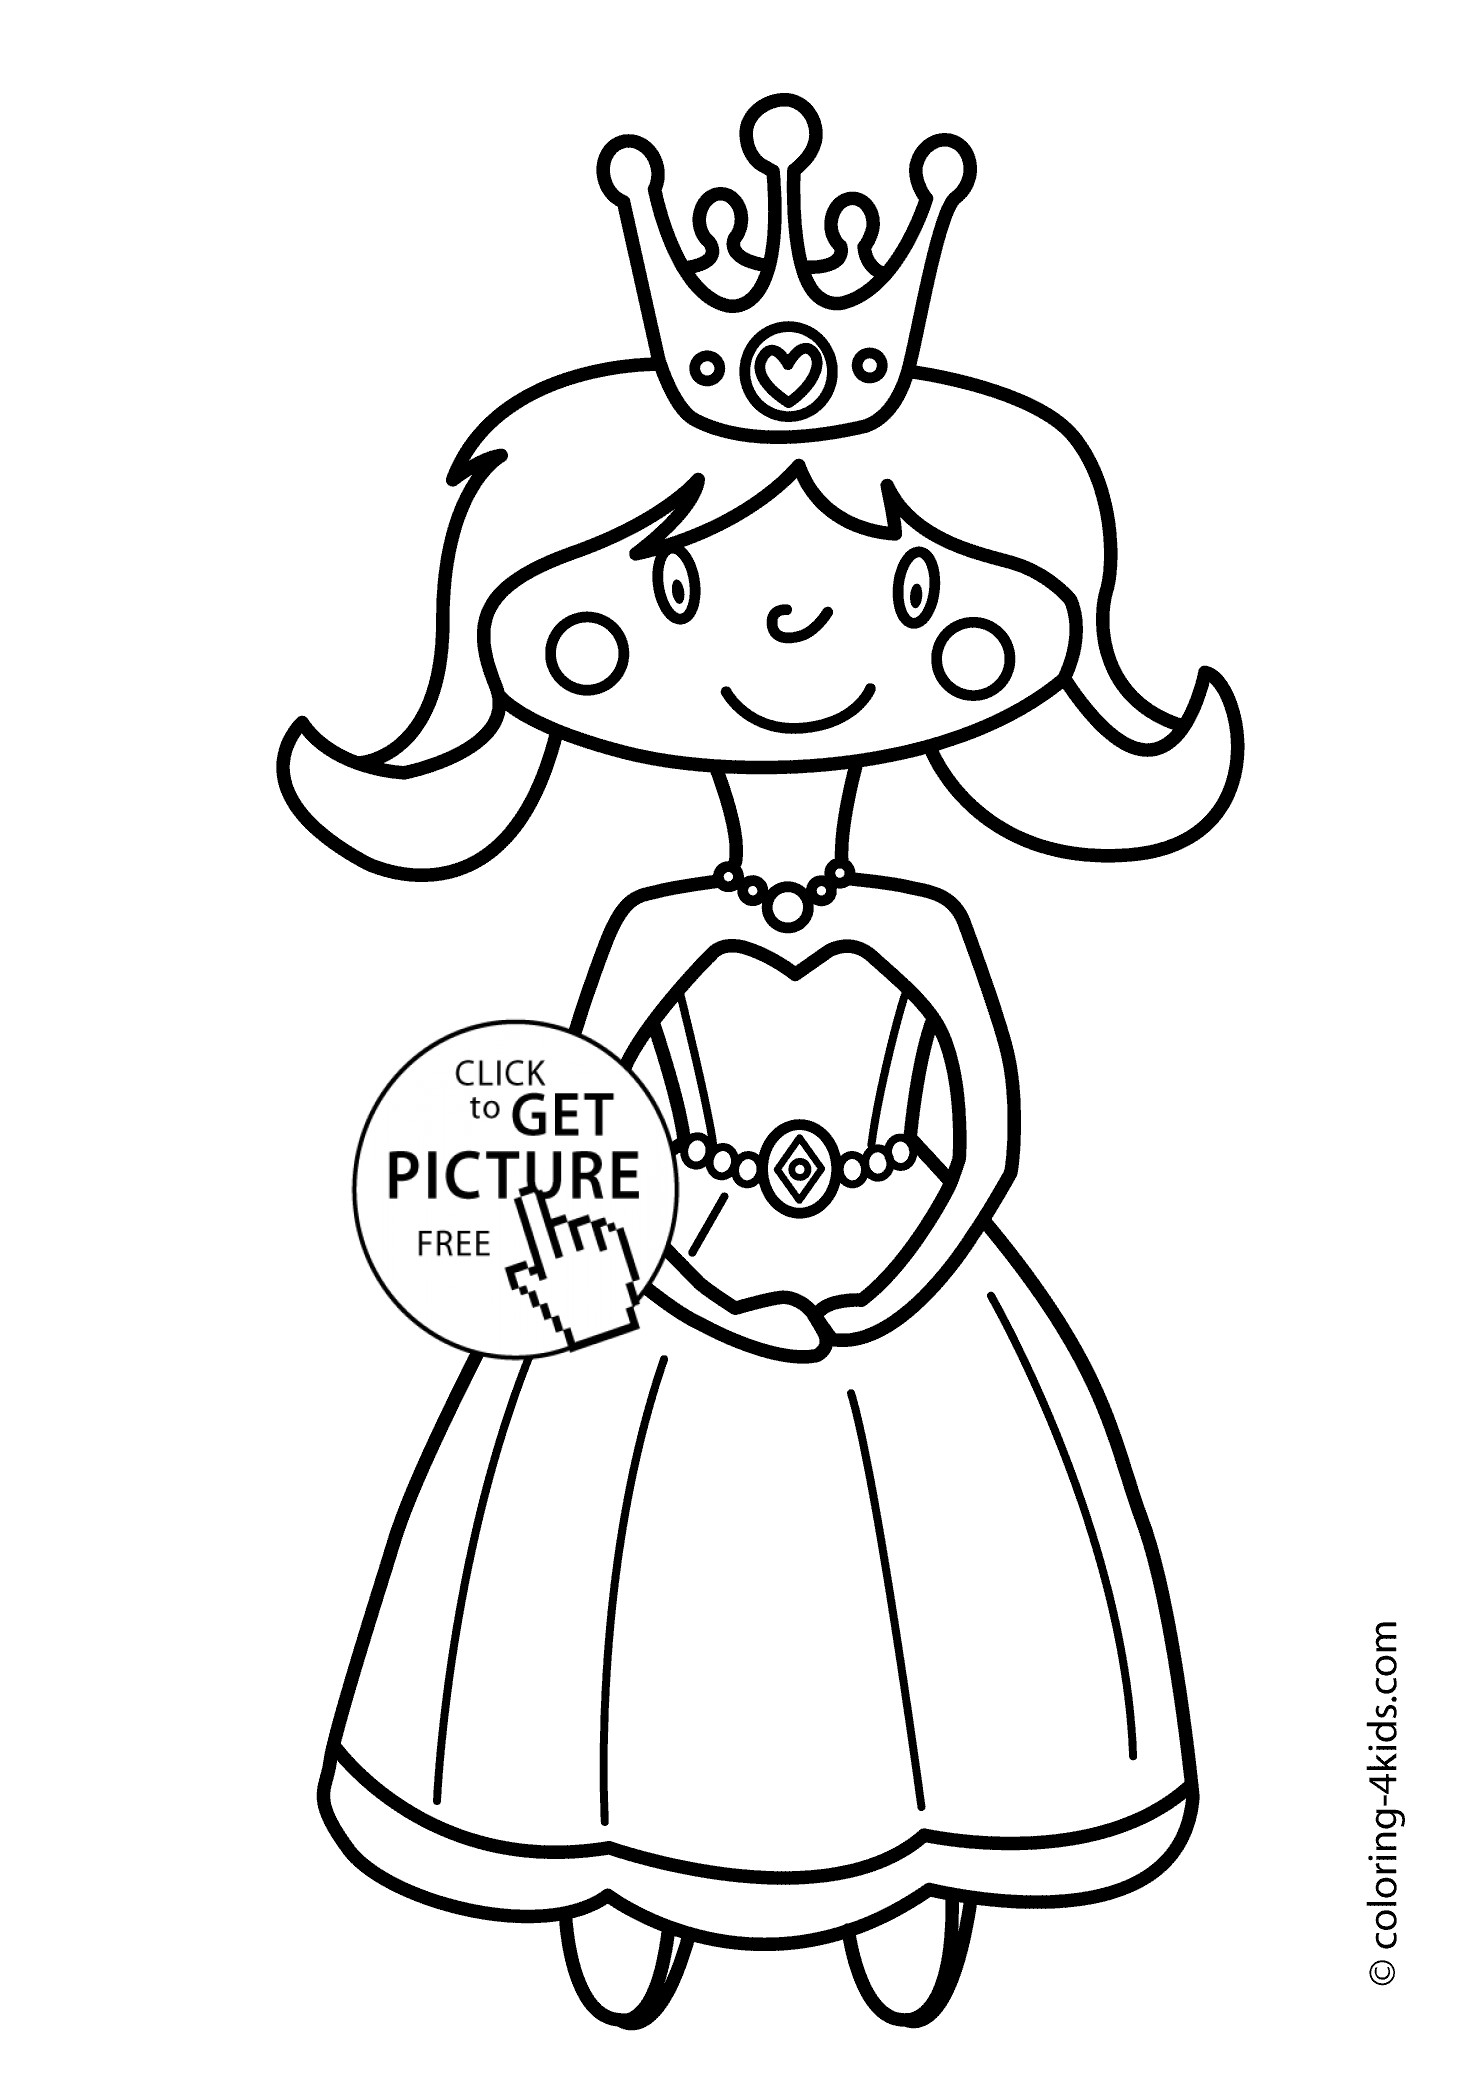 Printable Coloring Pages For Girls
 Cute Princesse Coloring pages for girls printable